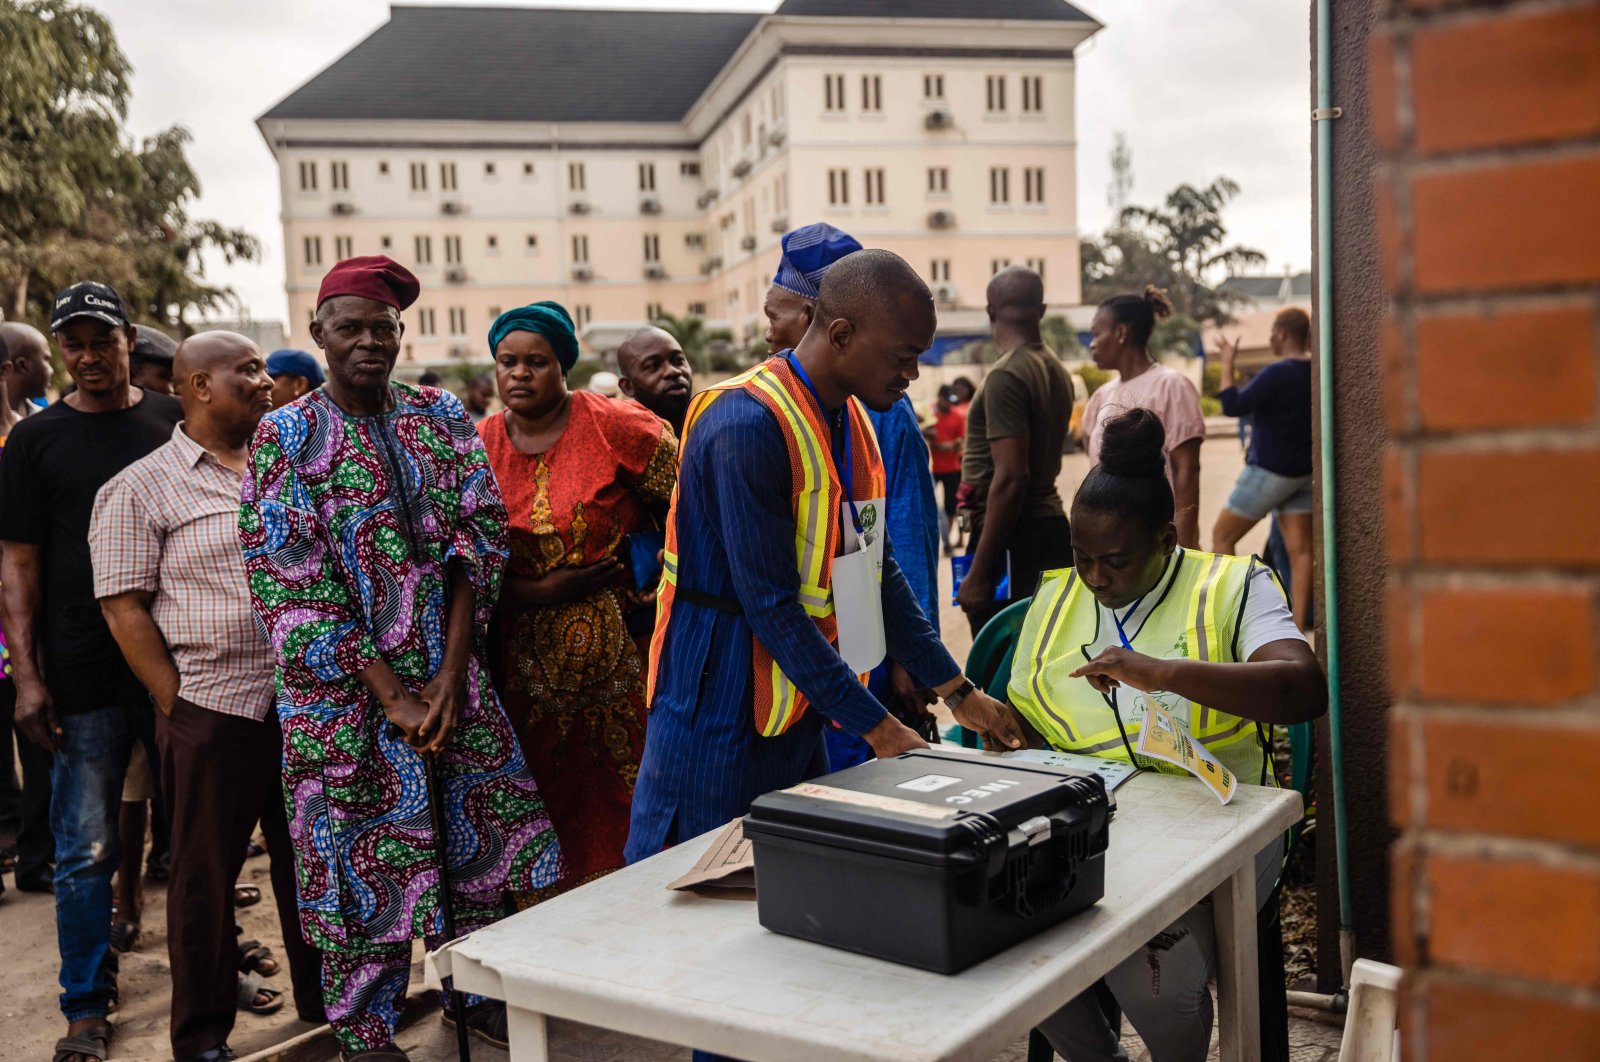 Independent National Electoral Commission (INEC) officials set up voting materials at a polling station in Ojuelegba, Lagos, Nigeria, Feb. 25, 2023. (AFP Photo)